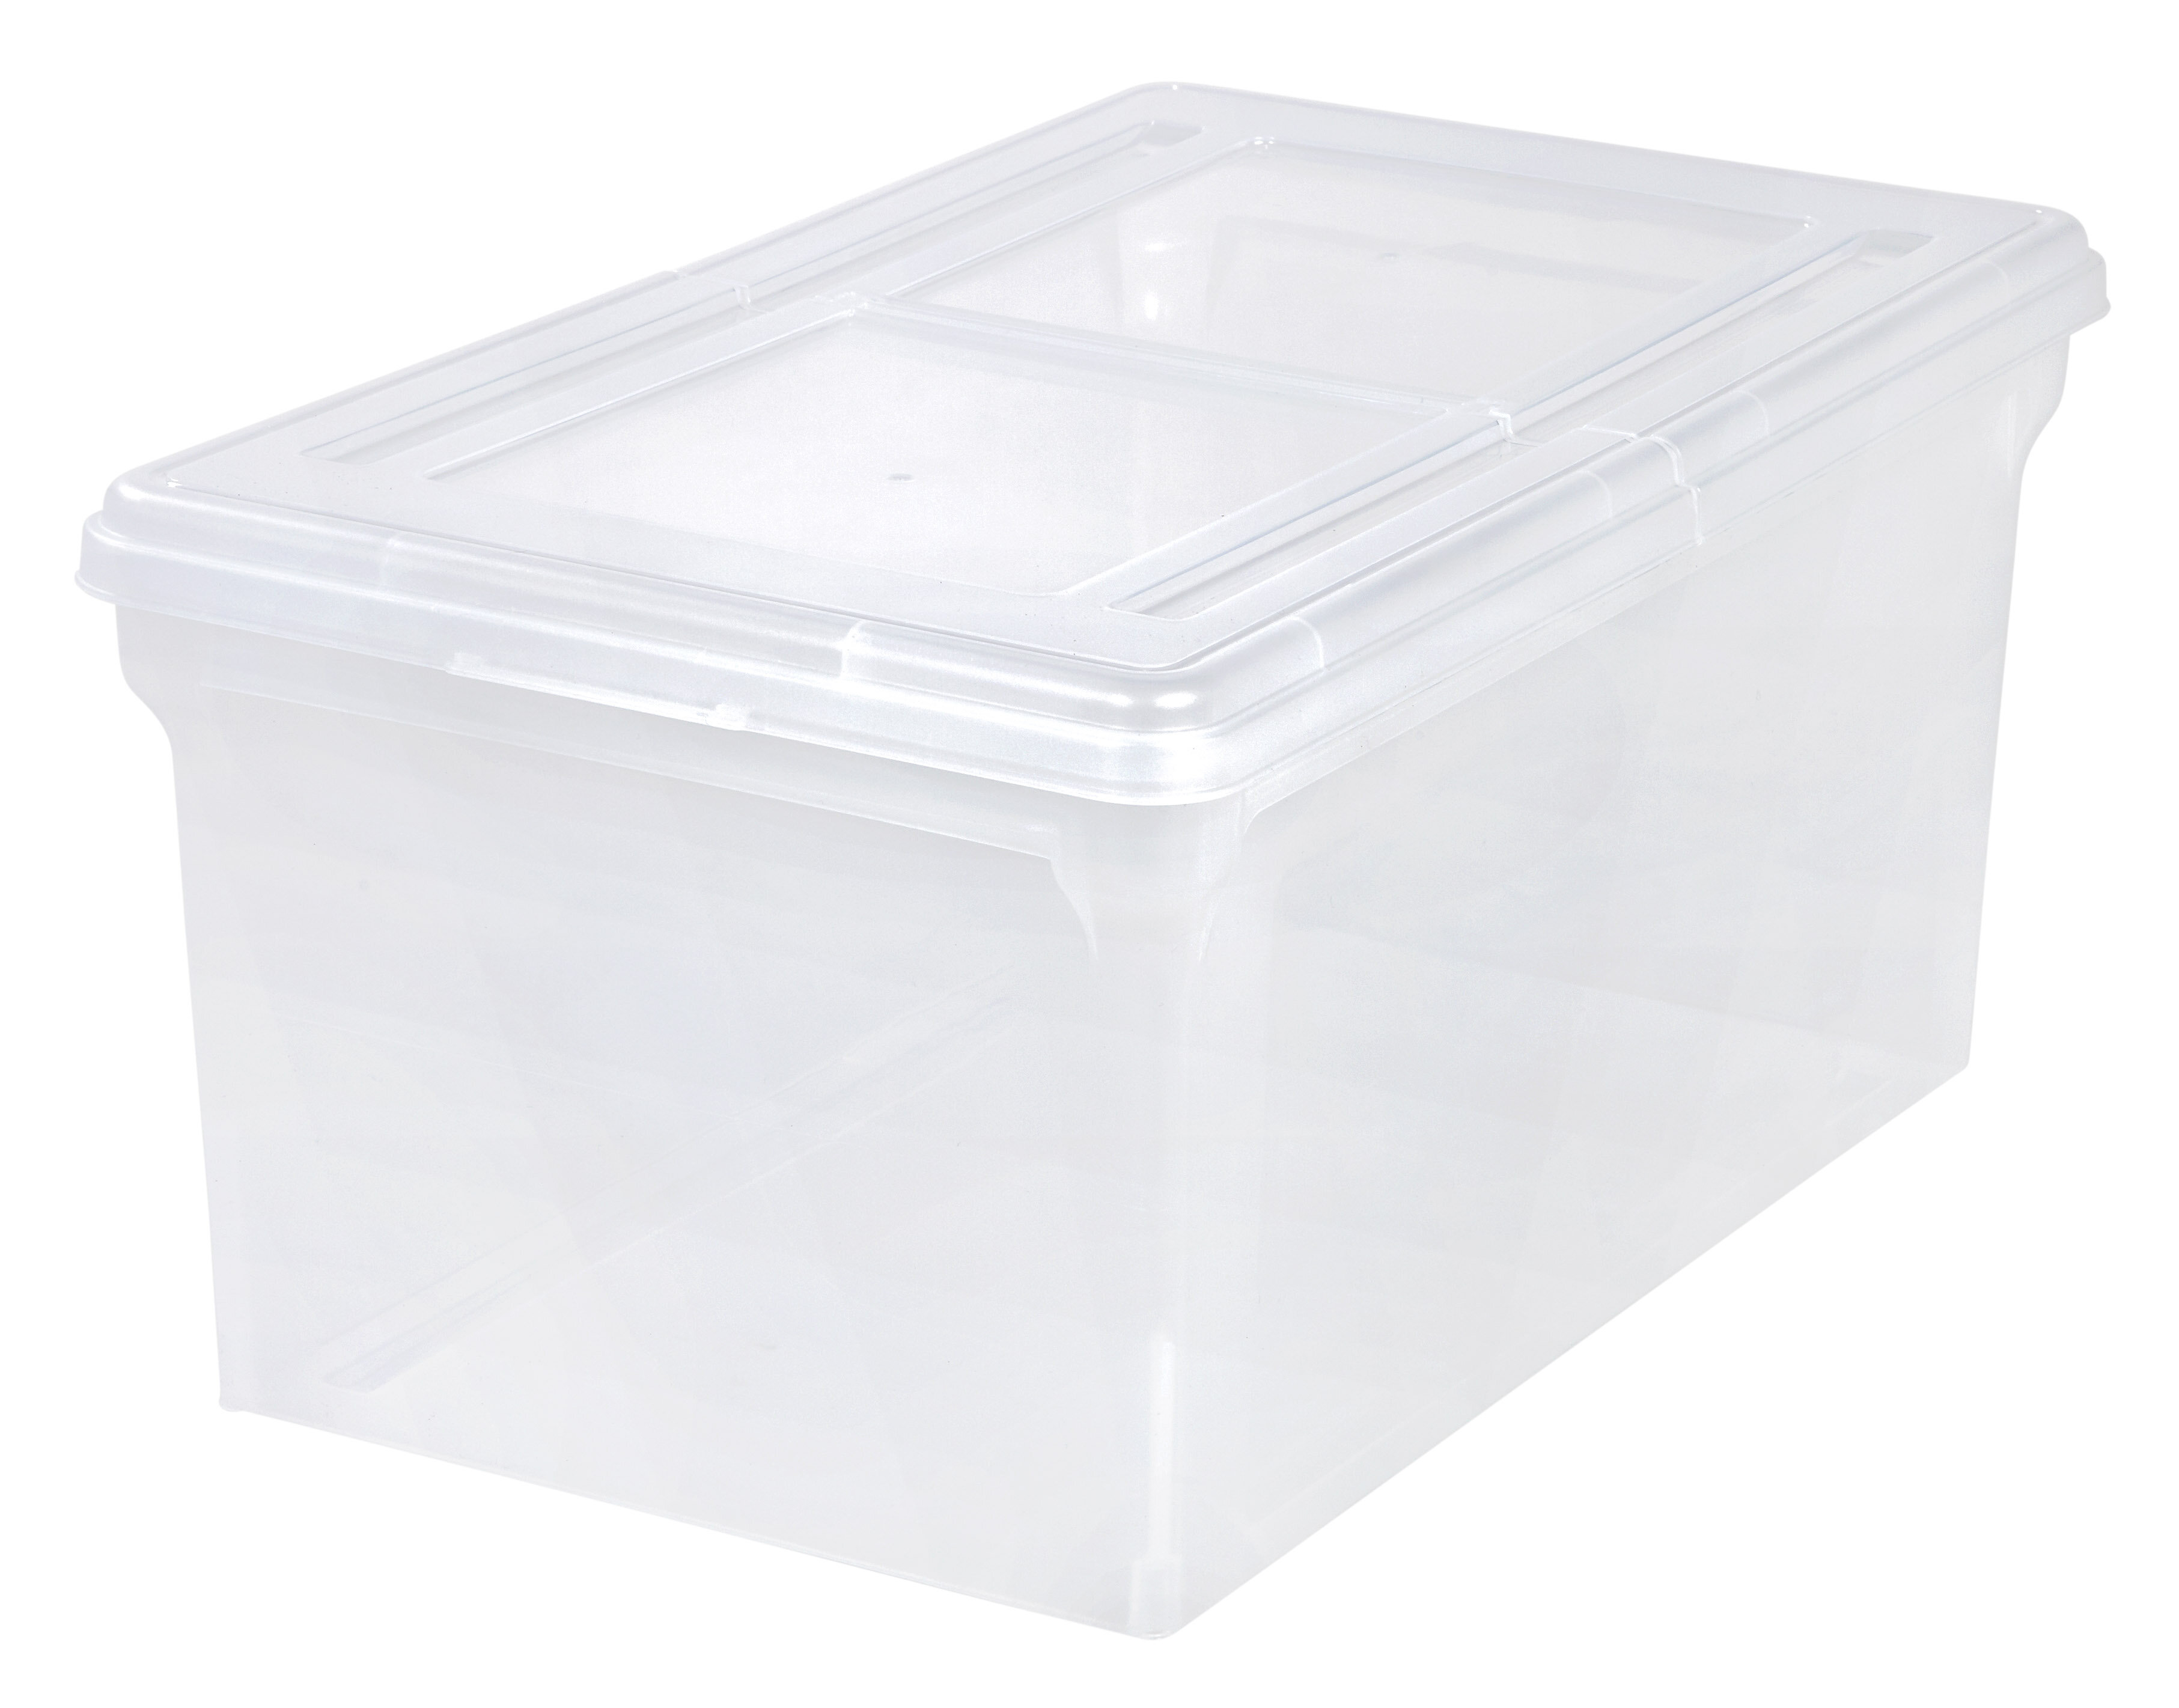 Iris Letter Size File Box Storage, 5 Pack, Clear